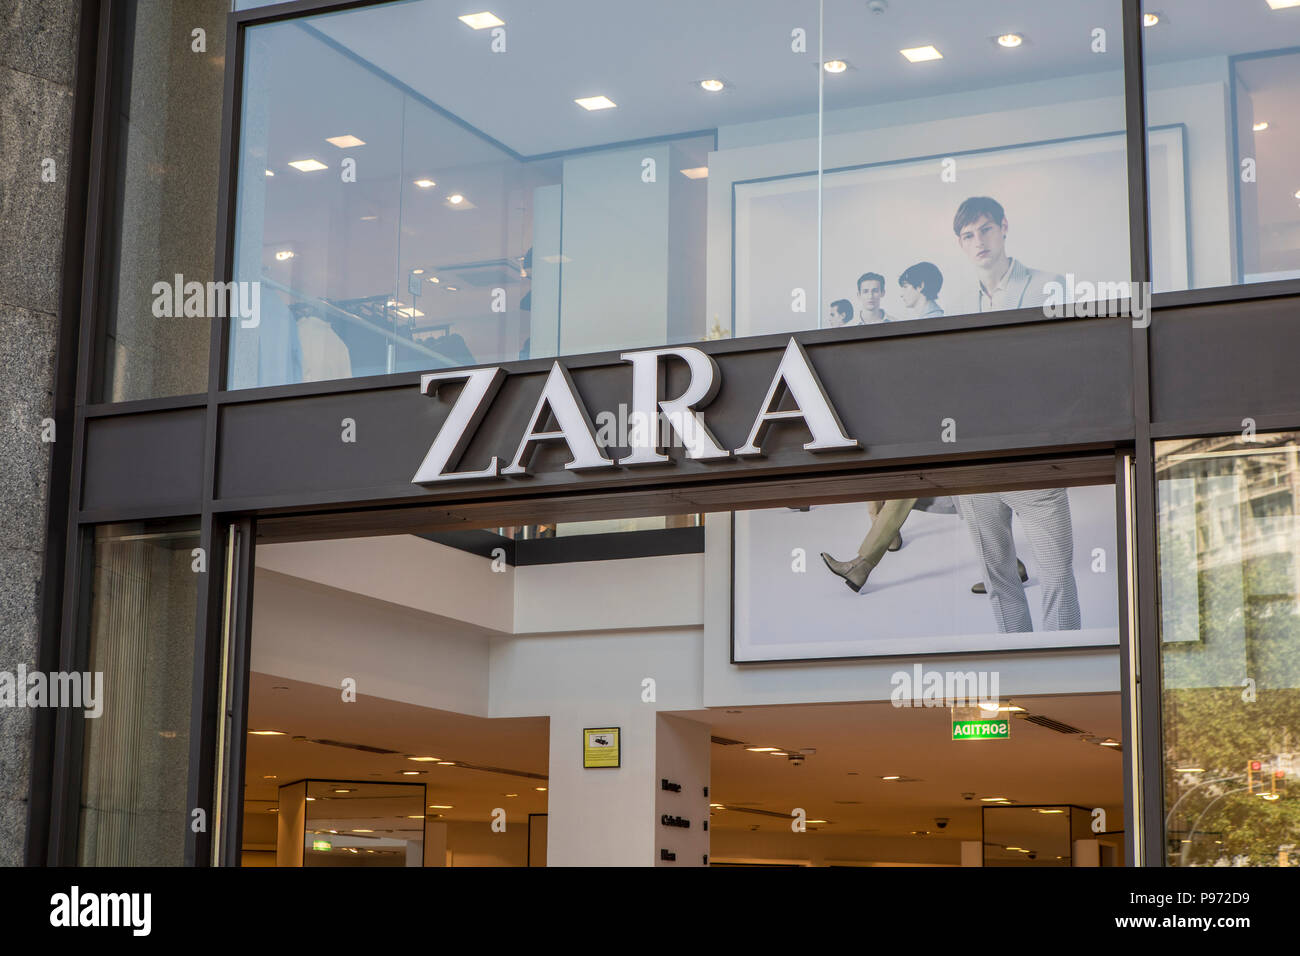 Zara store on Passeig de Gràcia street in Barcelona. Barcelona is a city in  Spain. It is the capital and largest city of Catalonia, as well as the  second most populous municipality